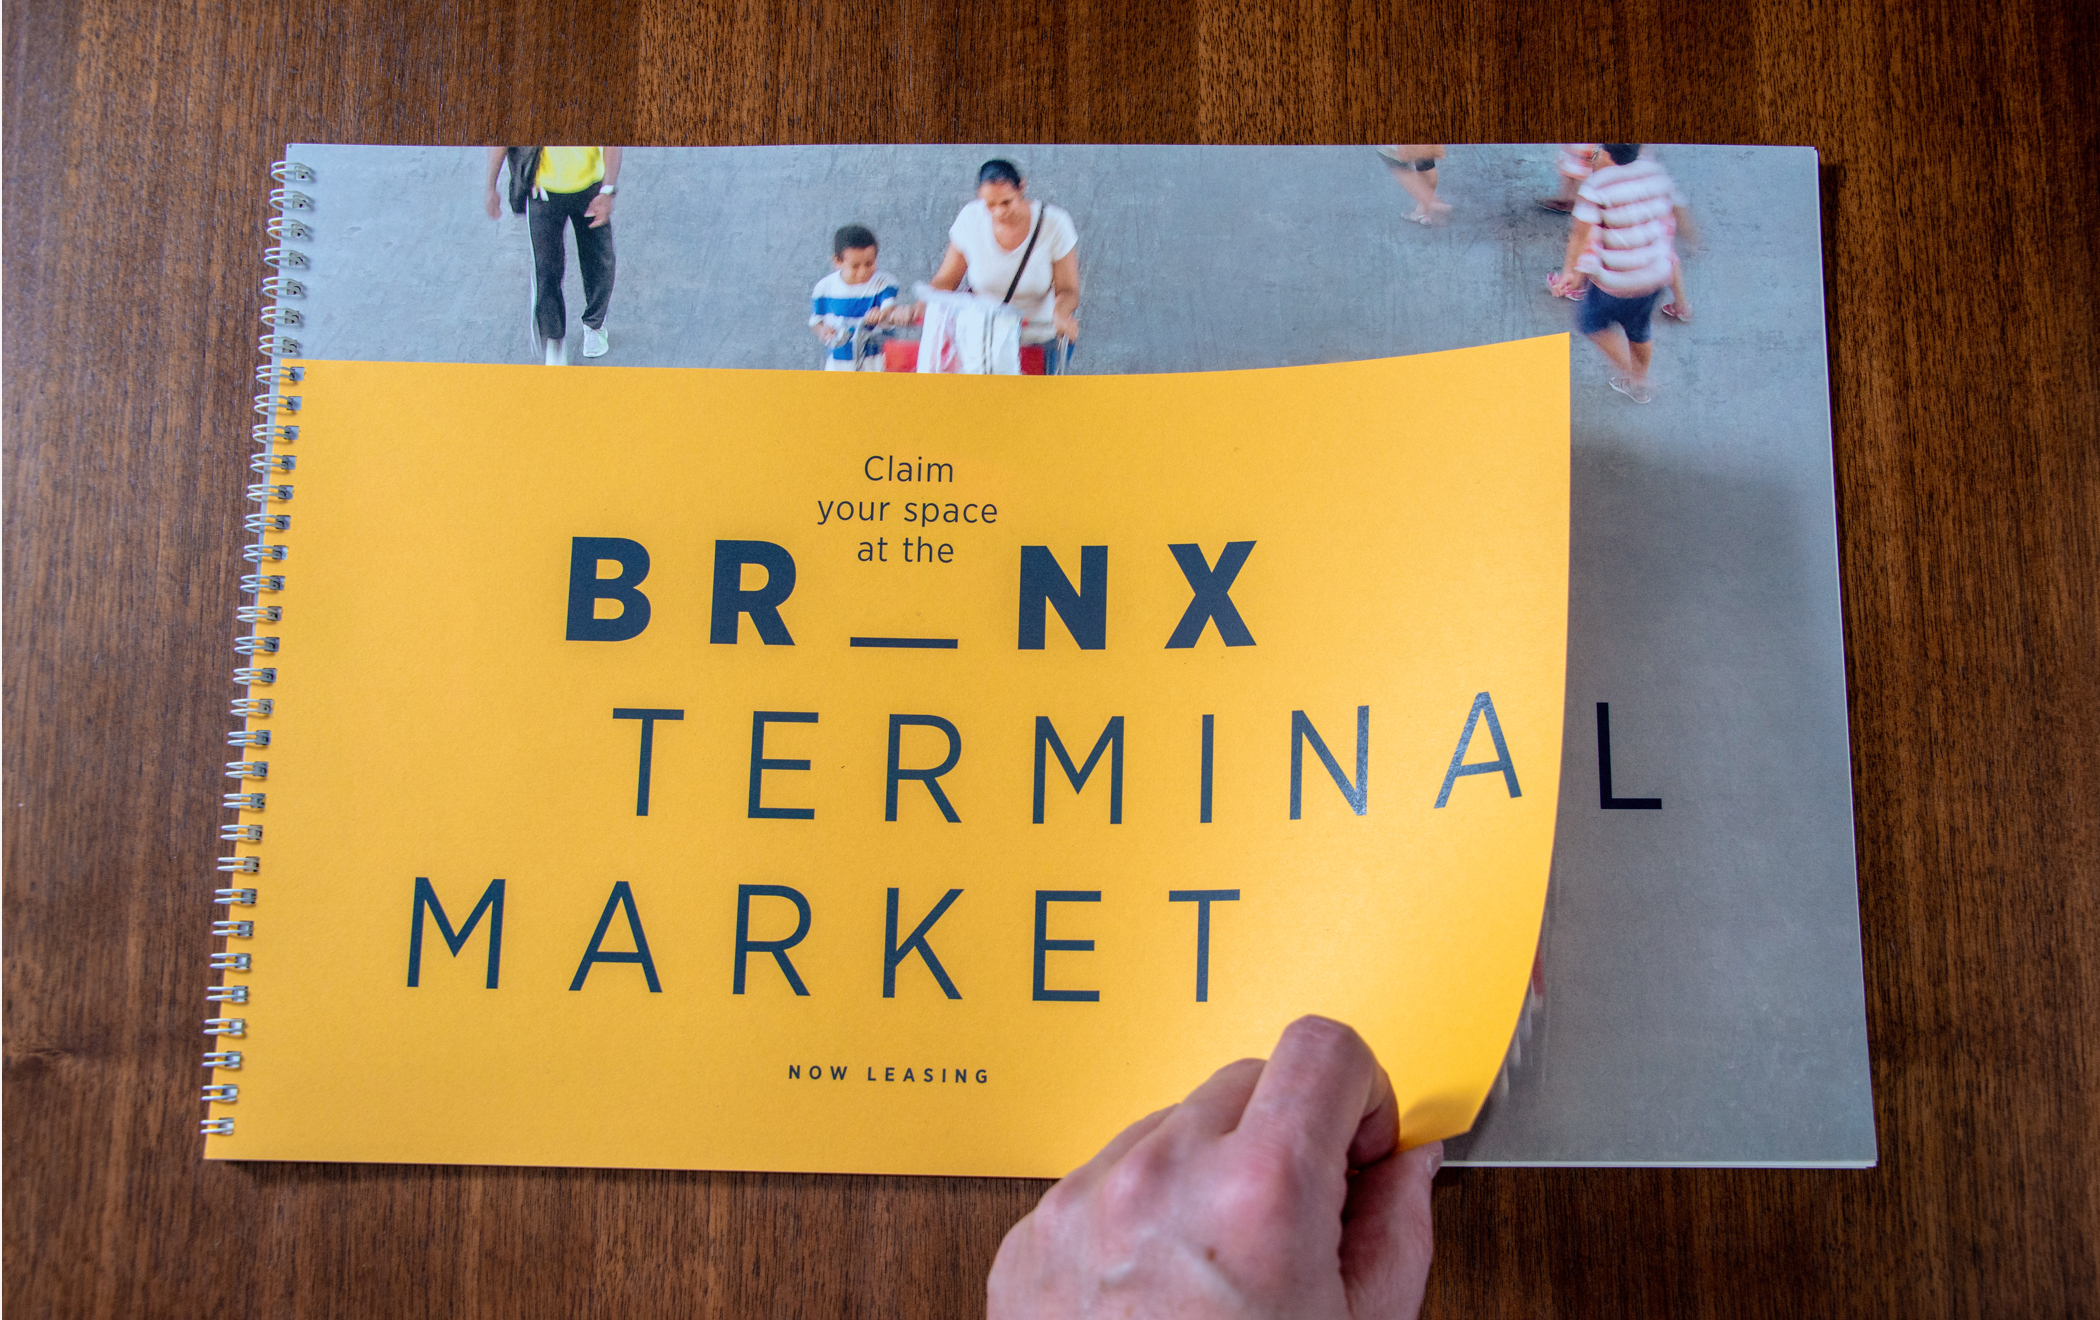 A hand pulling open the cover of the Bronx Terminal Market leasing brochure.